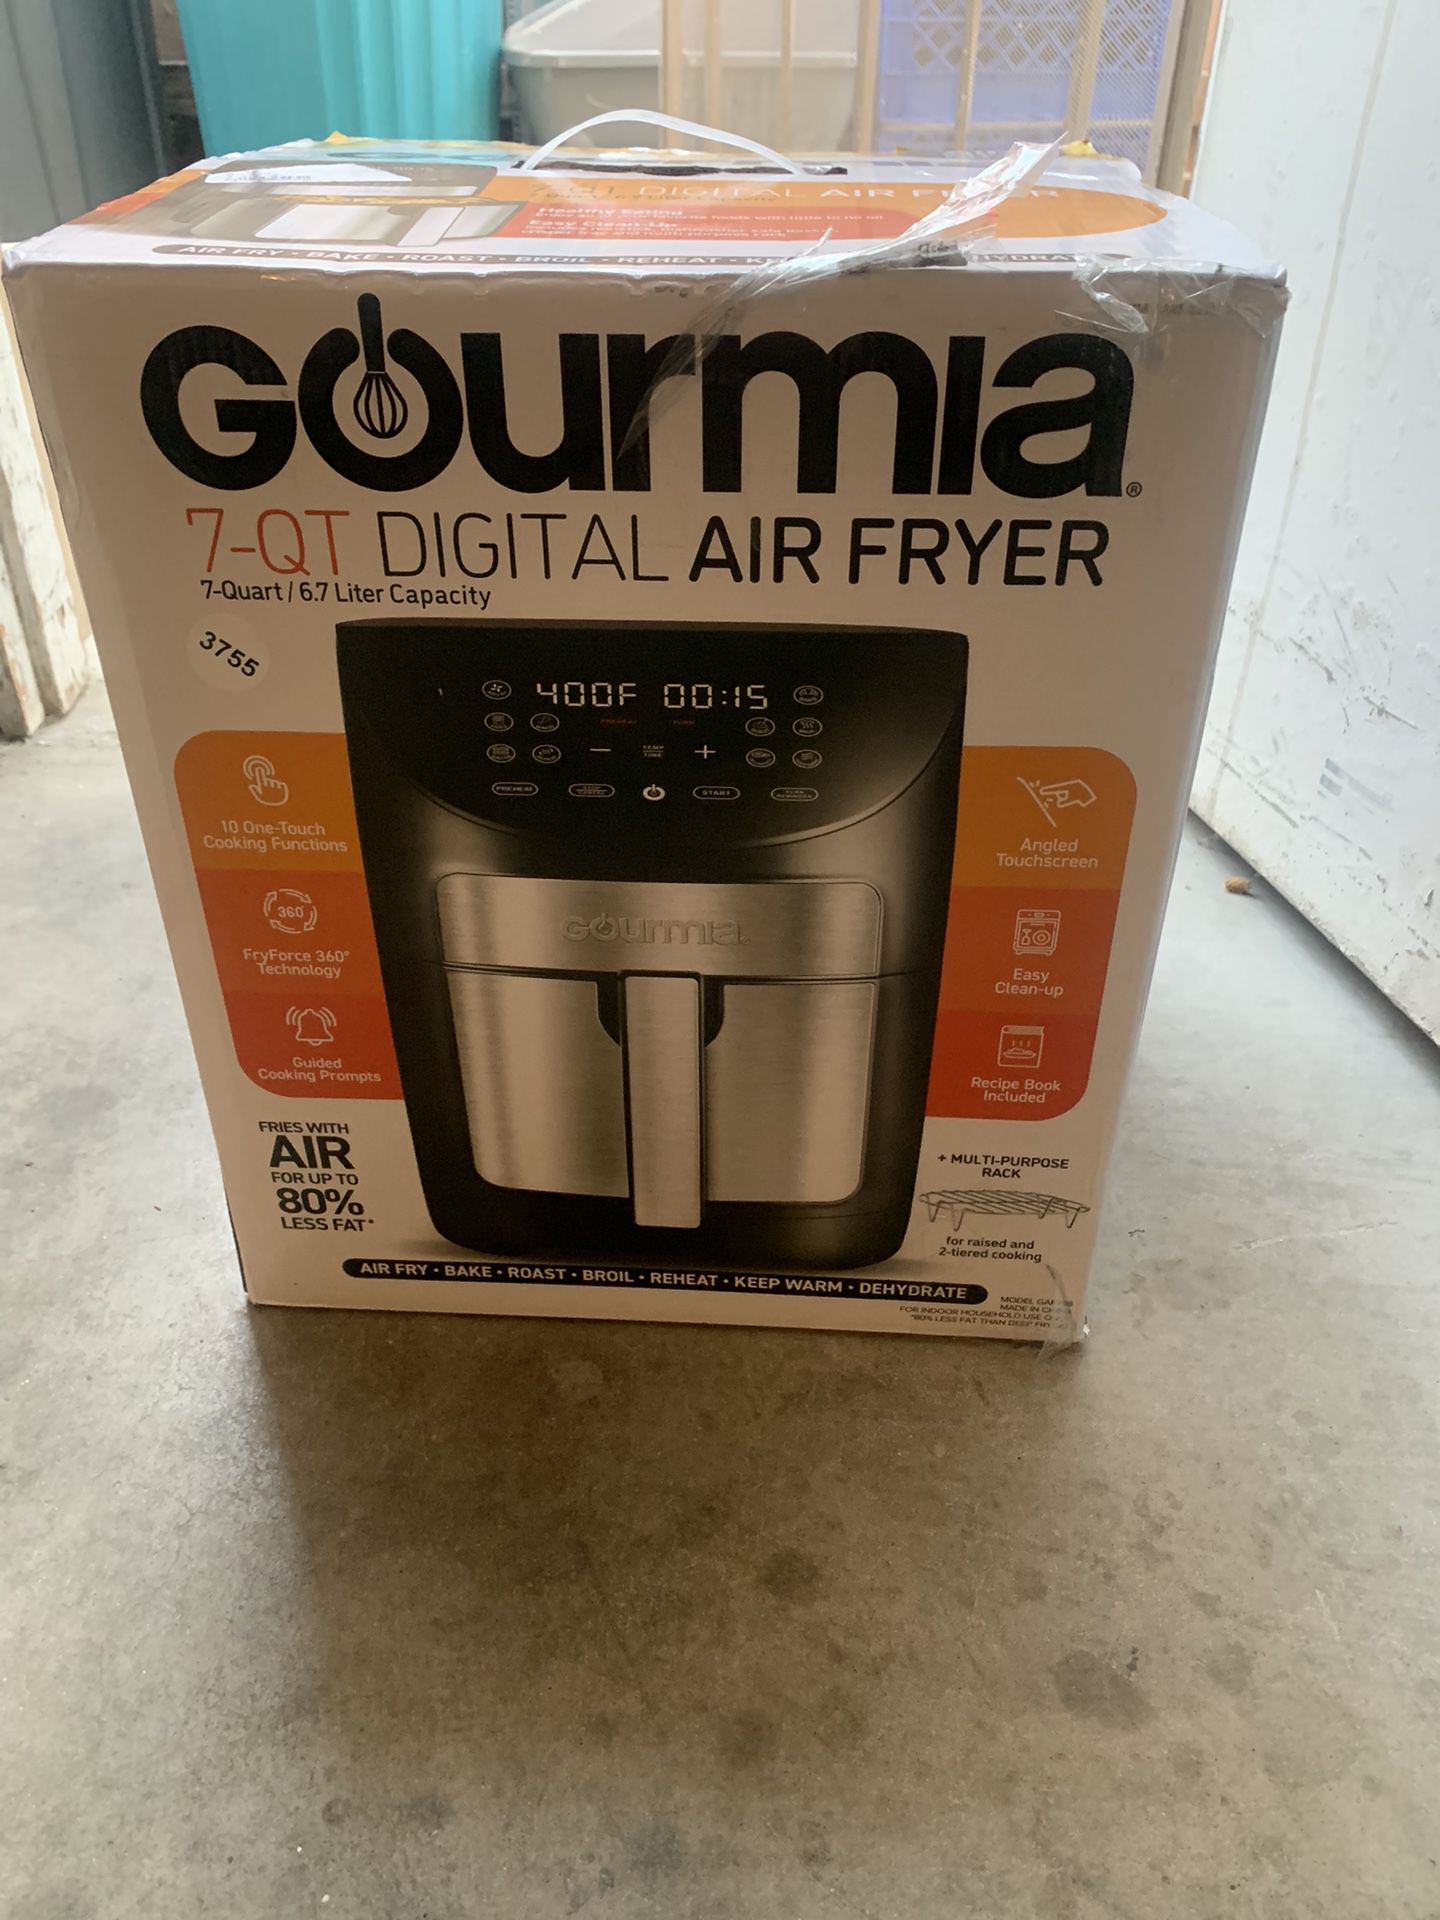 Gourmia 7-Quart Digital Air Fryer 10 One-Touch Cooking Functions